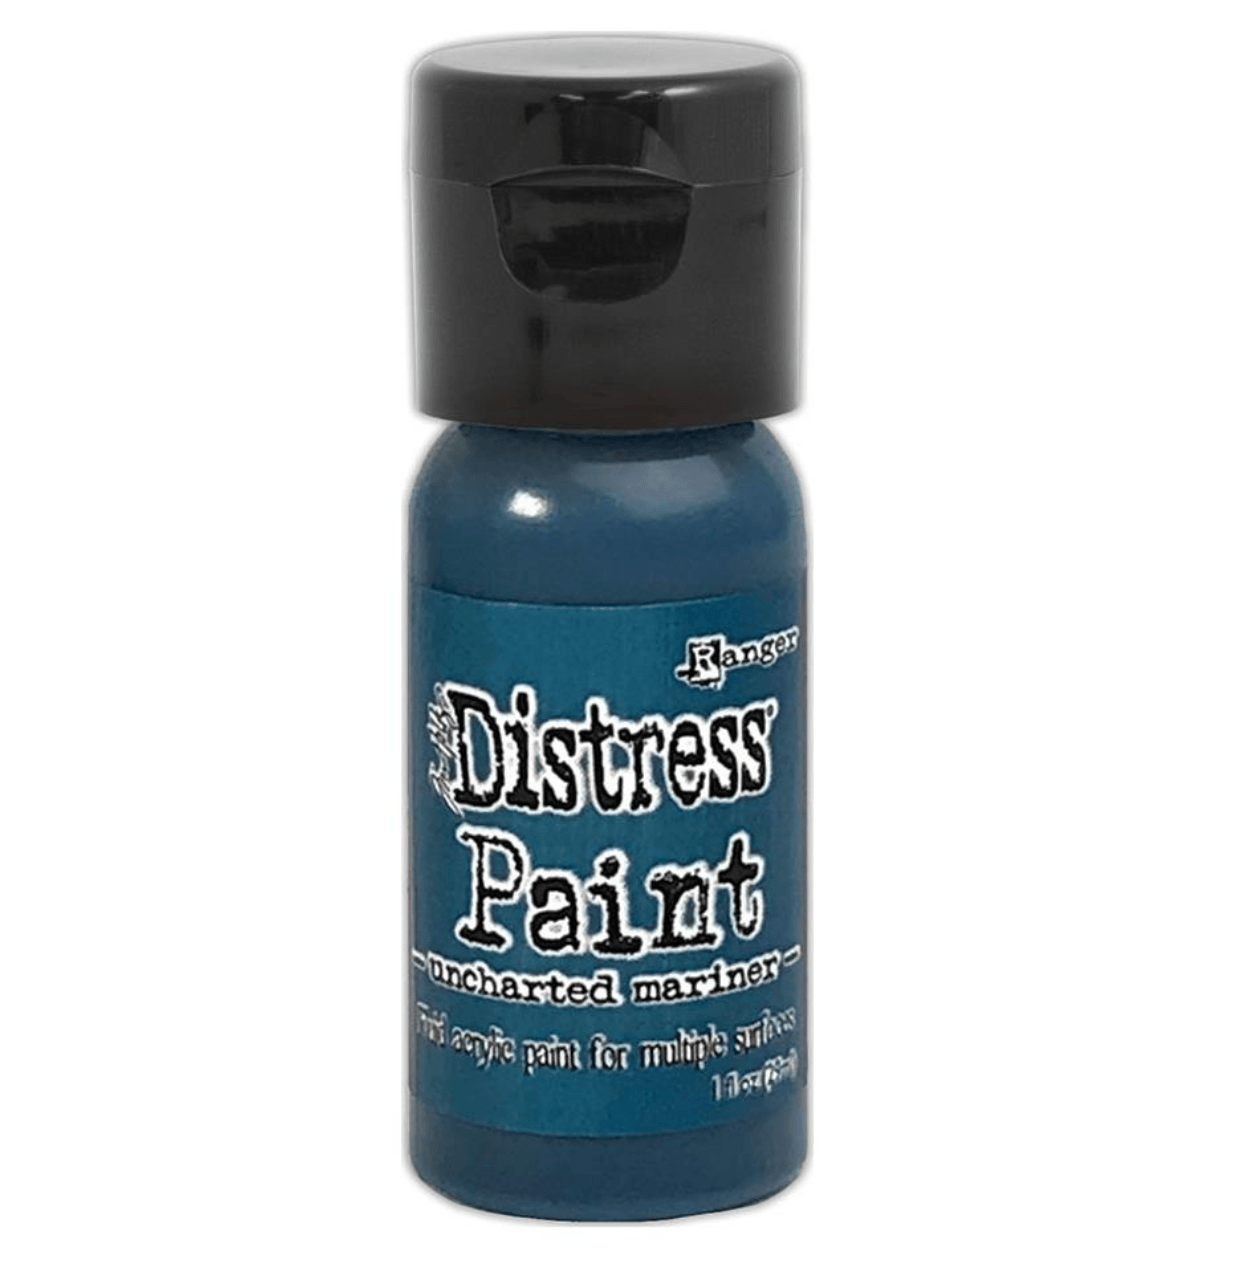 Tim Holtz Distress Paint - Uncharted Mariner - Ranger Ink - Messy Papercrafts